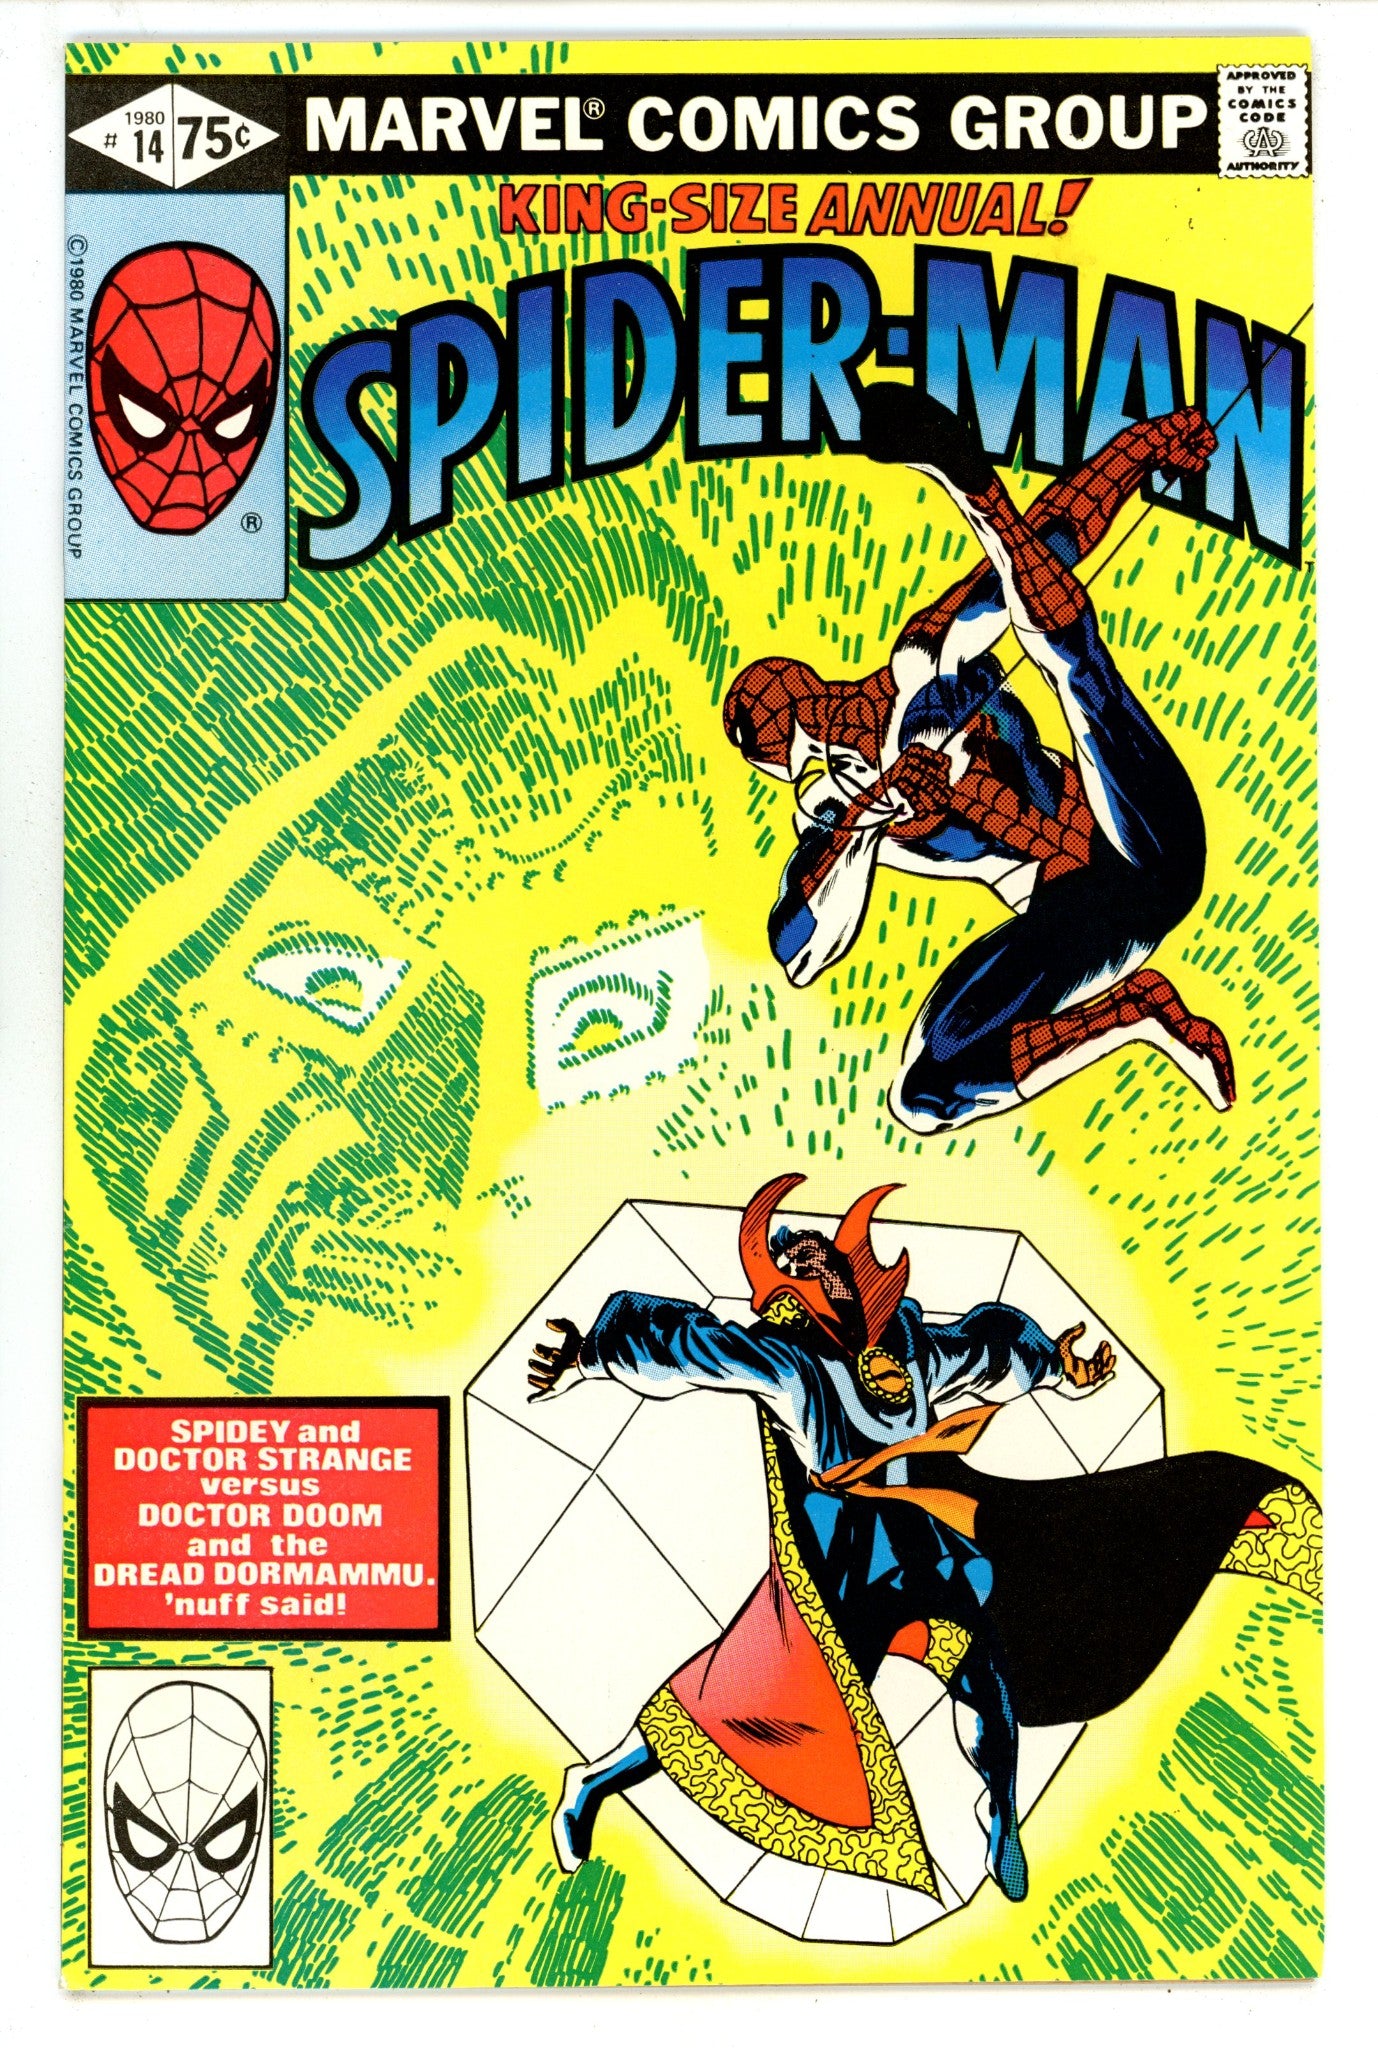 The Amazing Spider-Man Annual Vol 1 14 FN+ (6.5) (1980) 